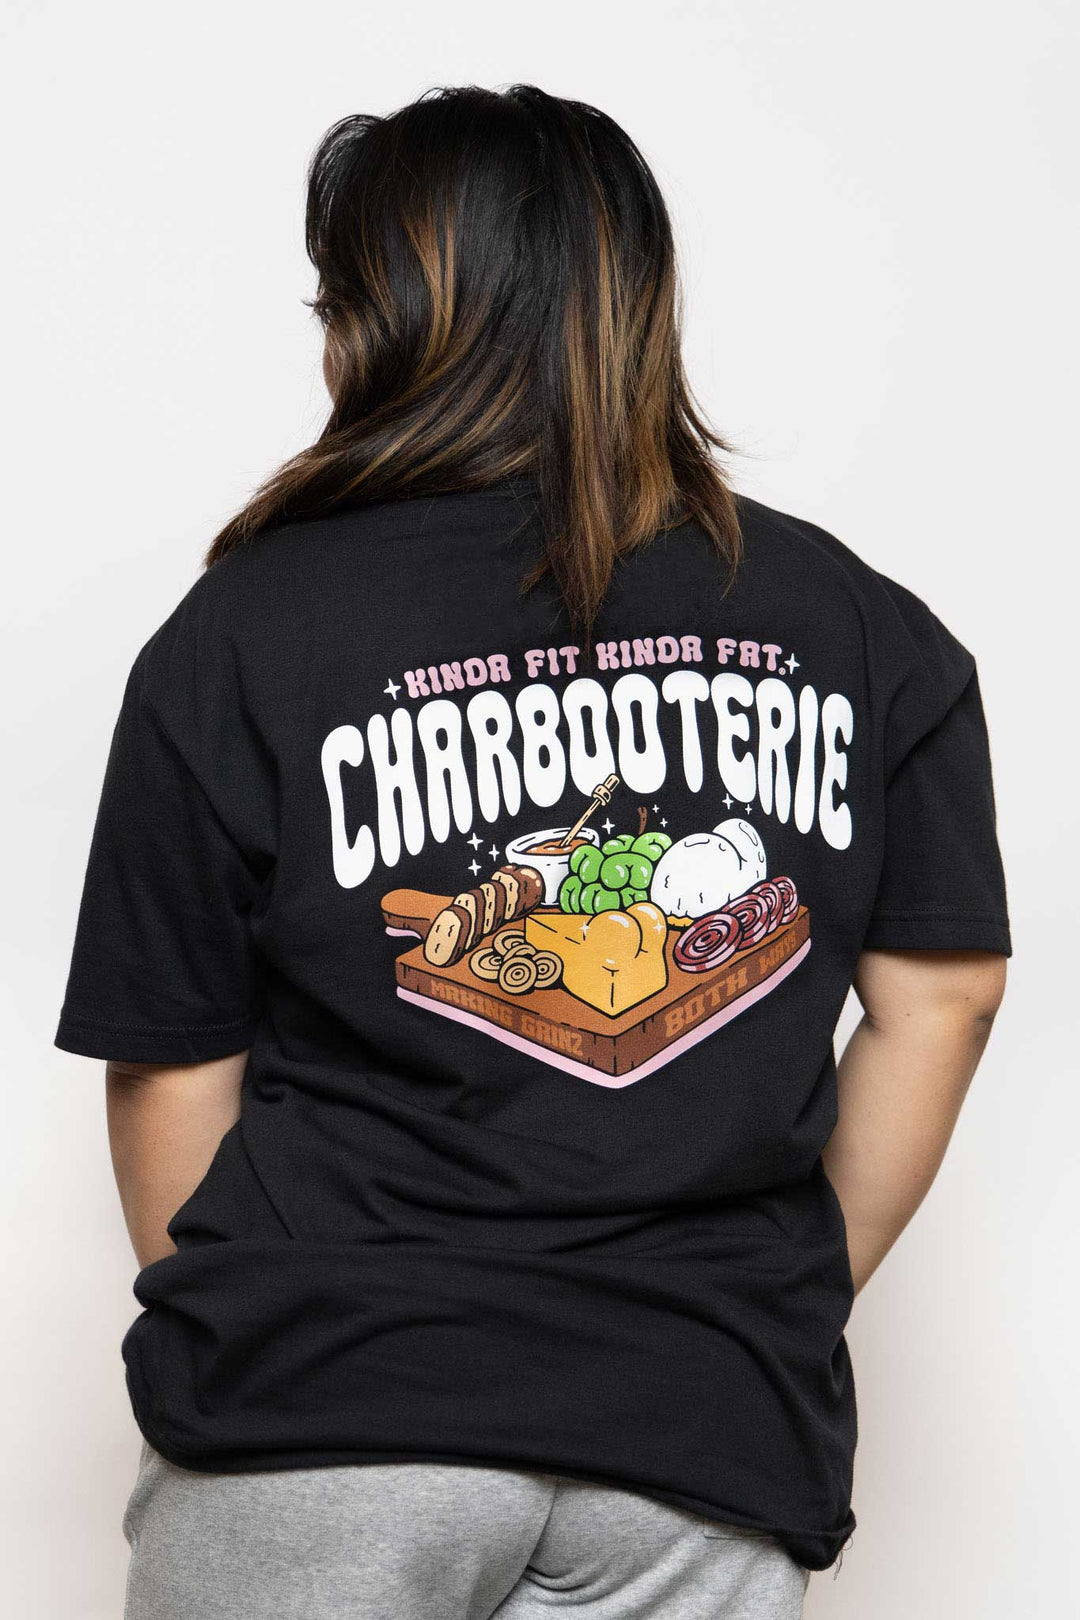 Charbooterie Shirt